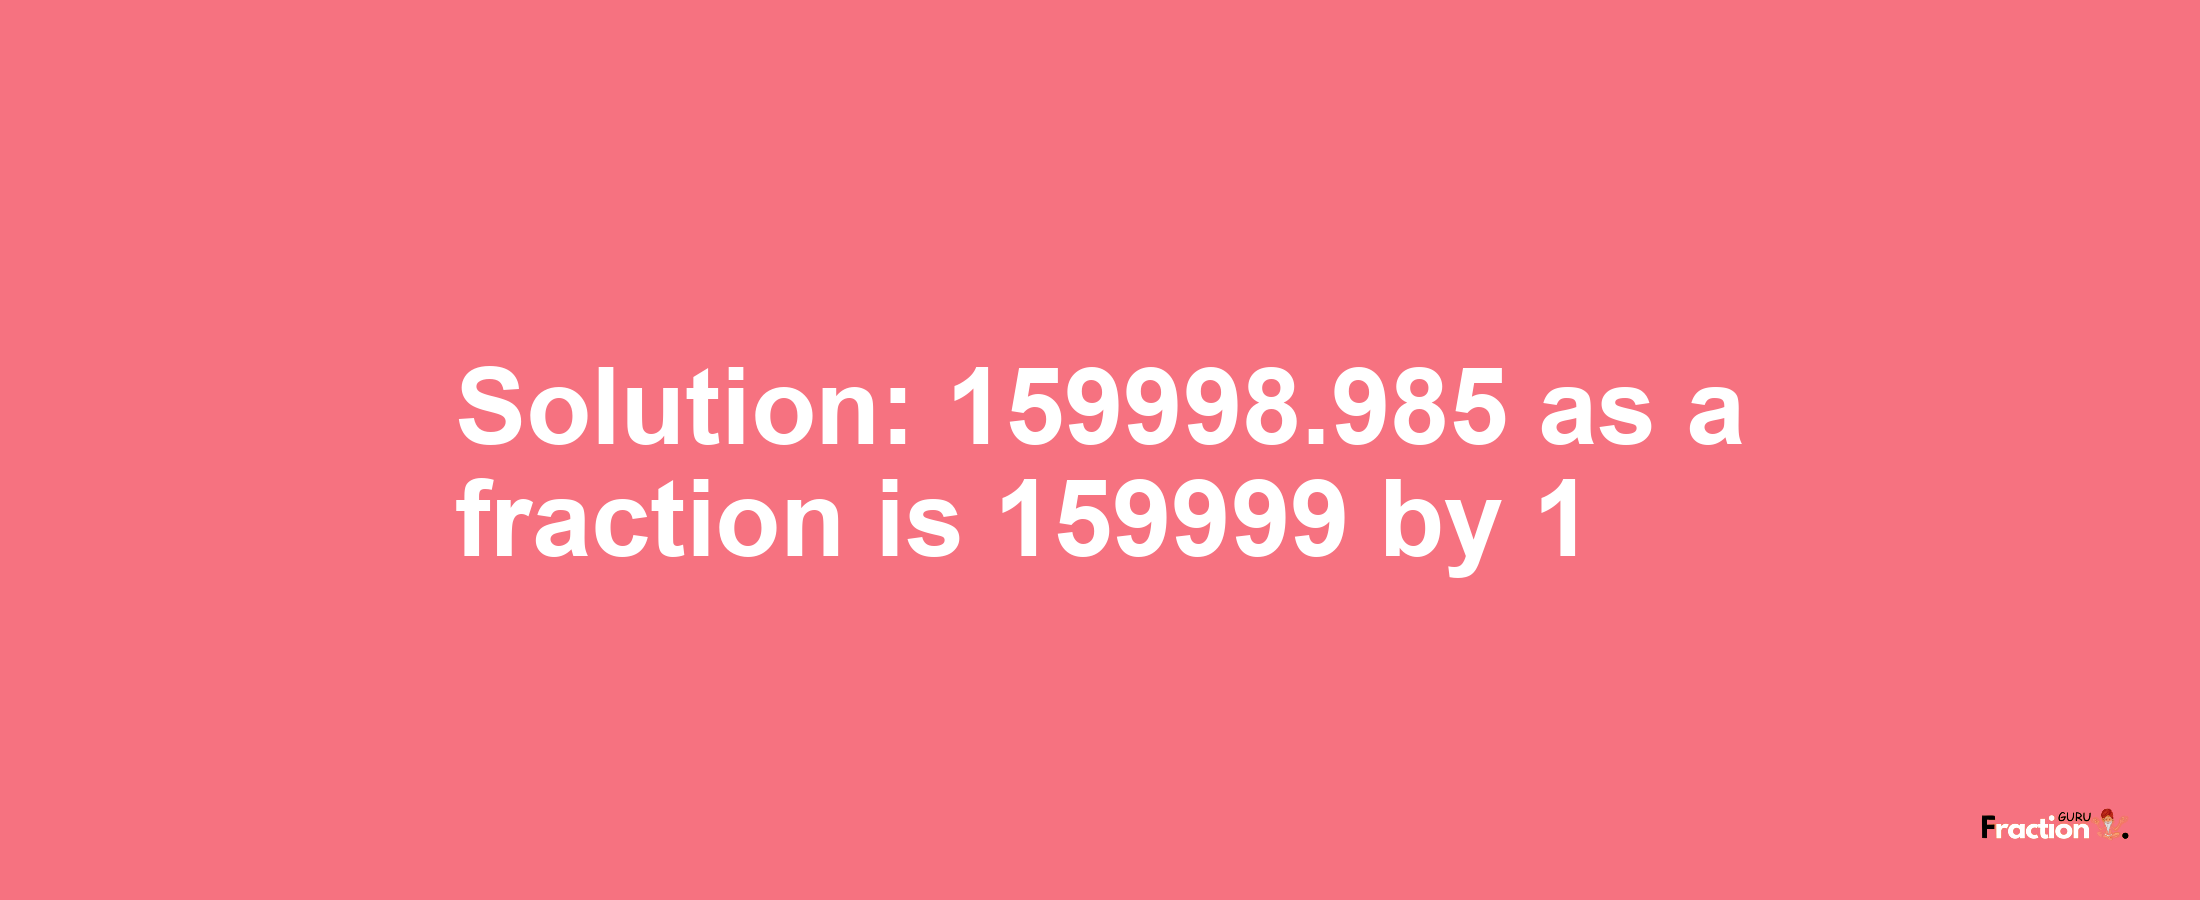 Solution:159998.985 as a fraction is 159999/1